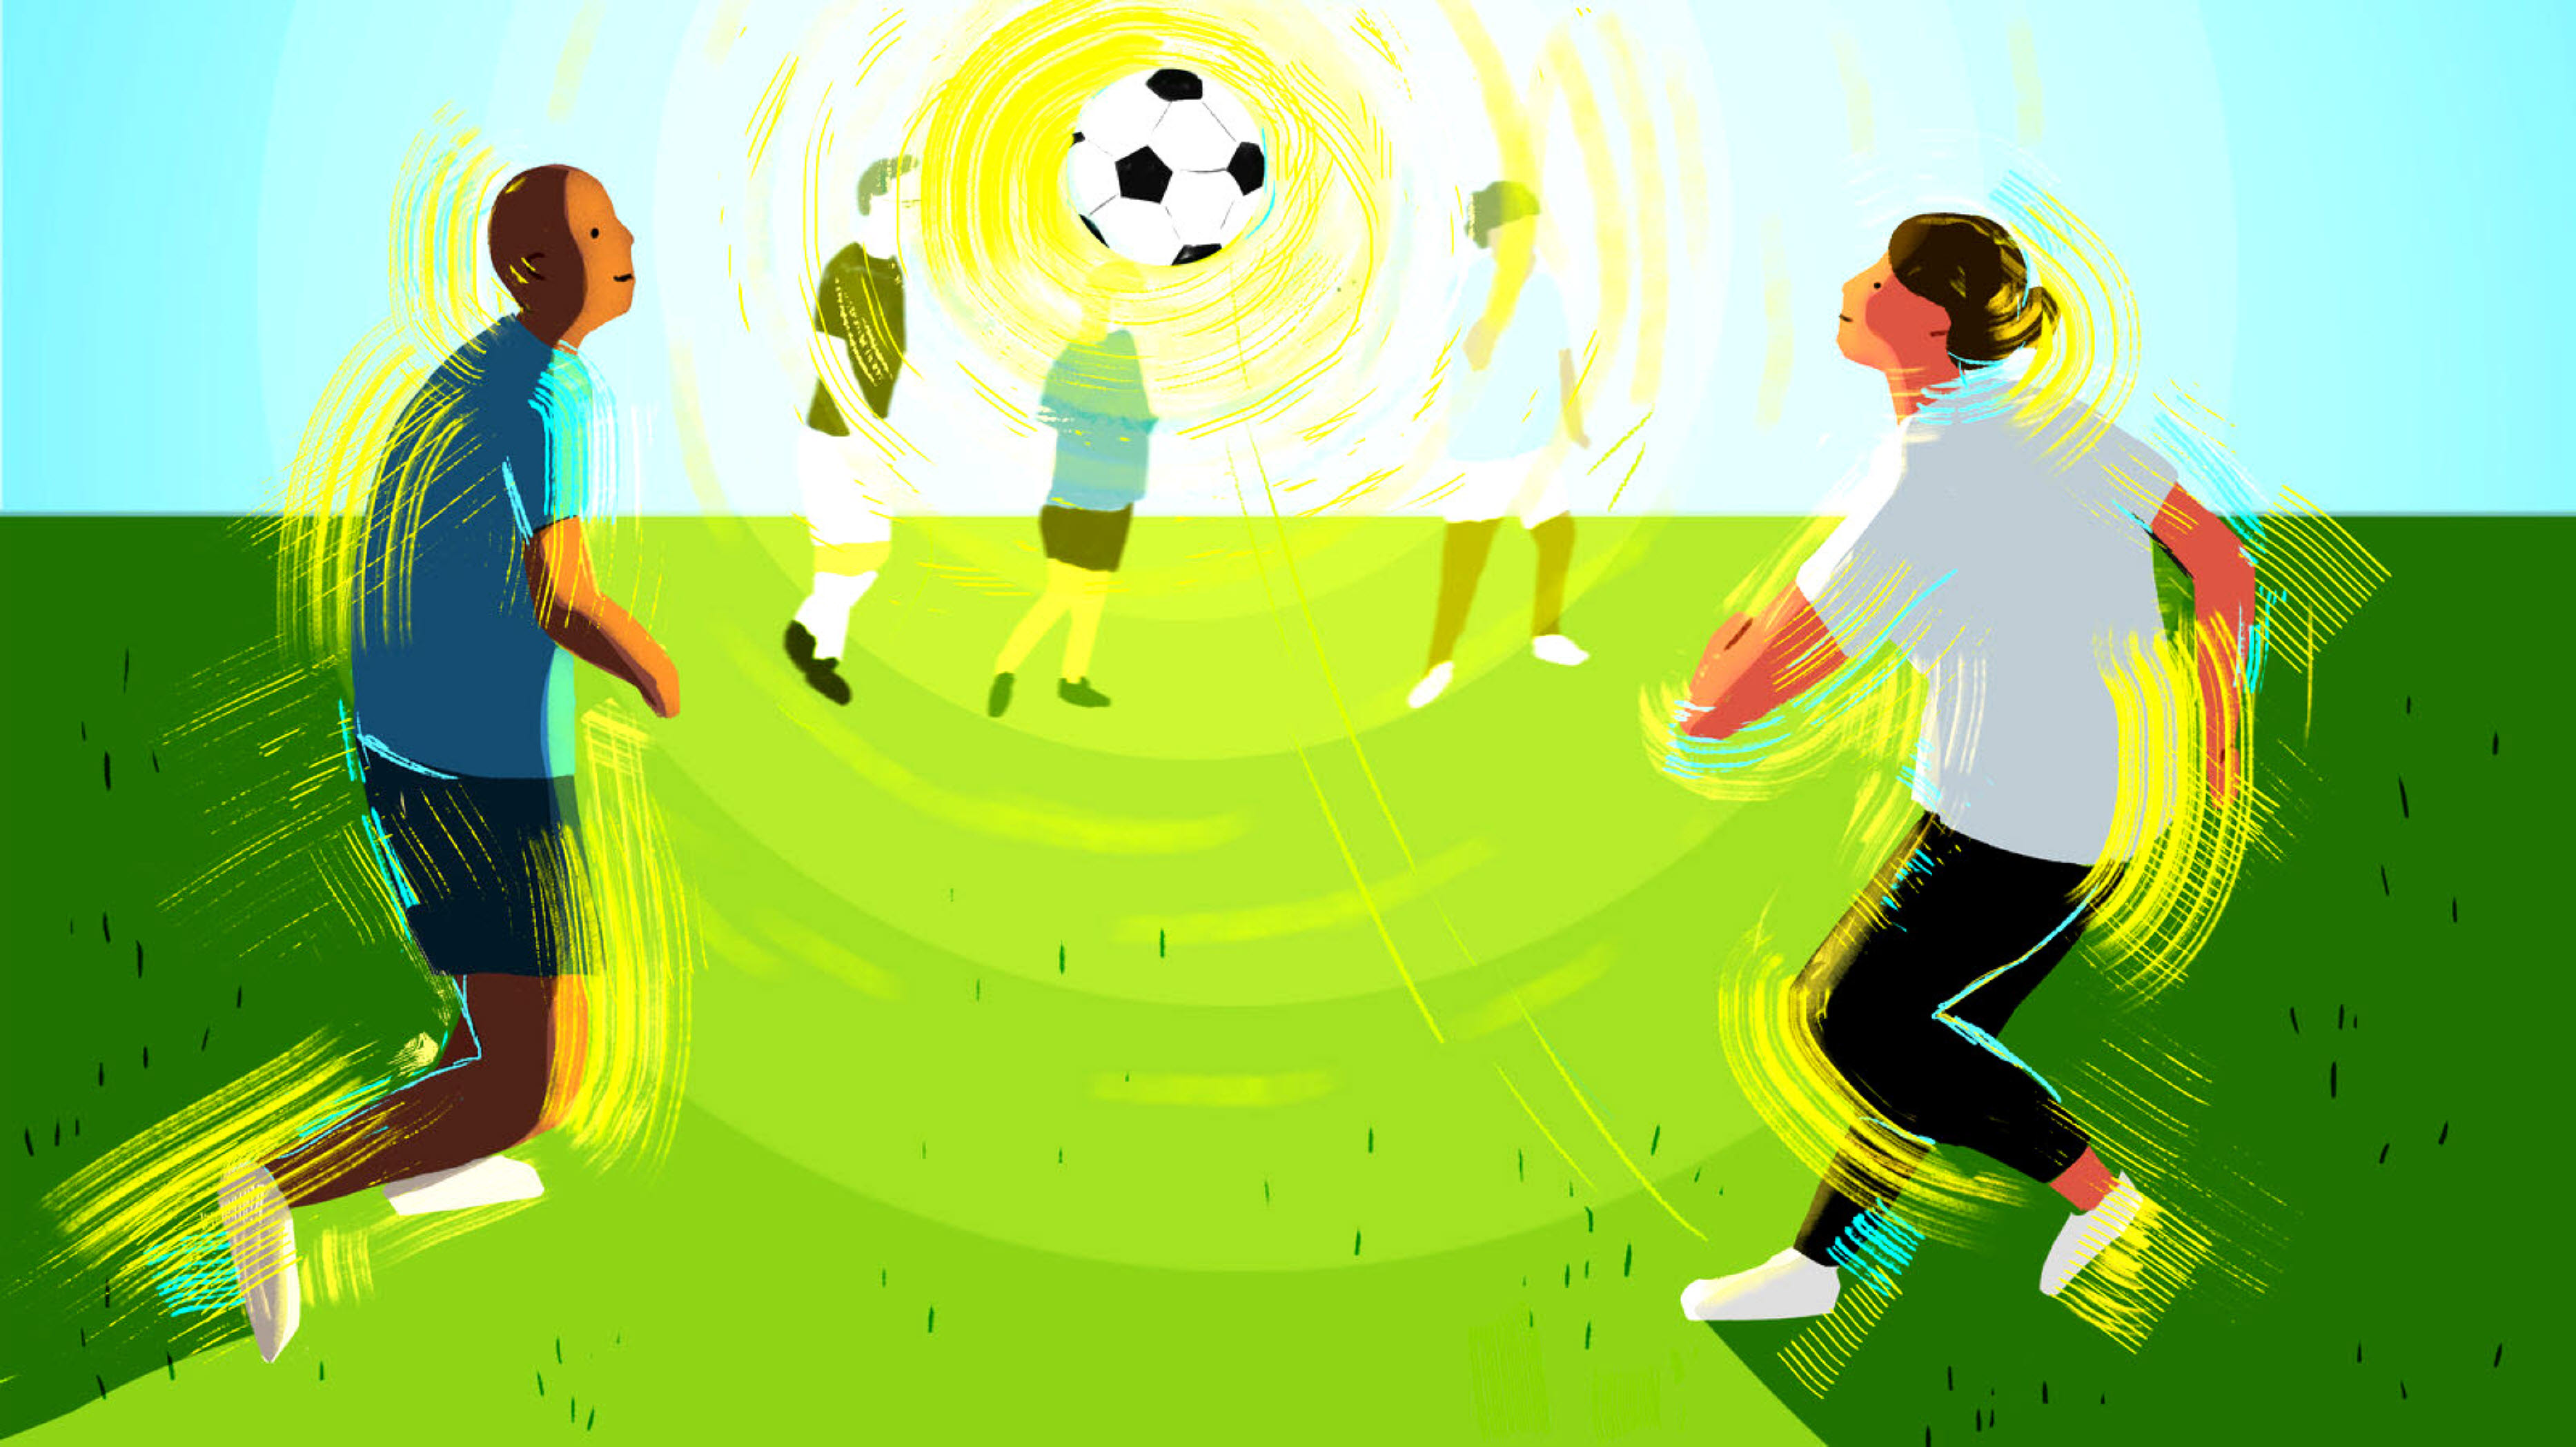 #JamesDonaldson On #MentalHealth – #Sports For #Kids With Learning And Emotional Challenges